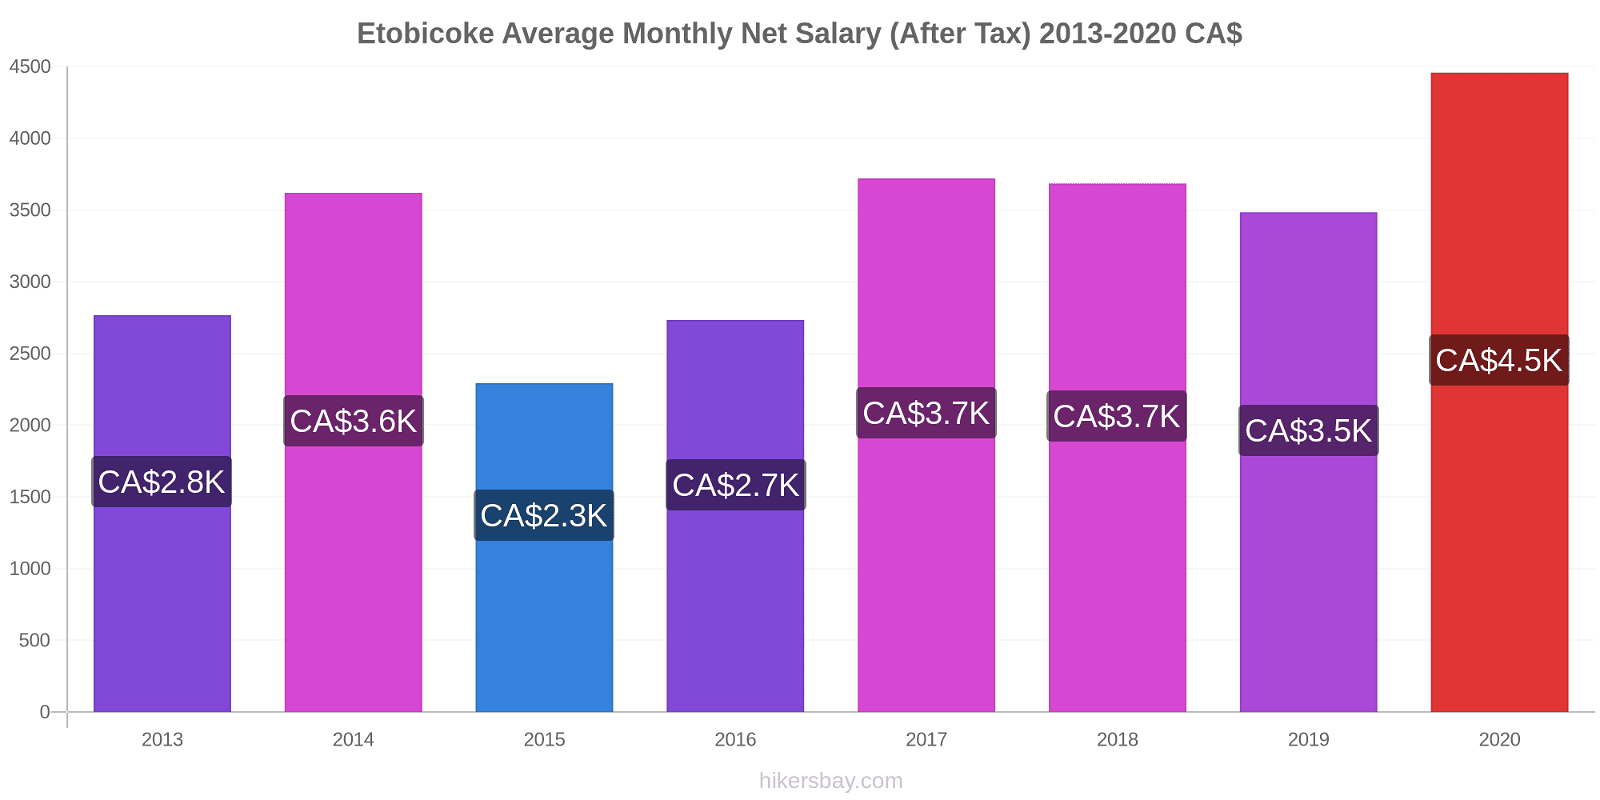 Etobicoke price changes Average Monthly Net Salary (After Tax) hikersbay.com